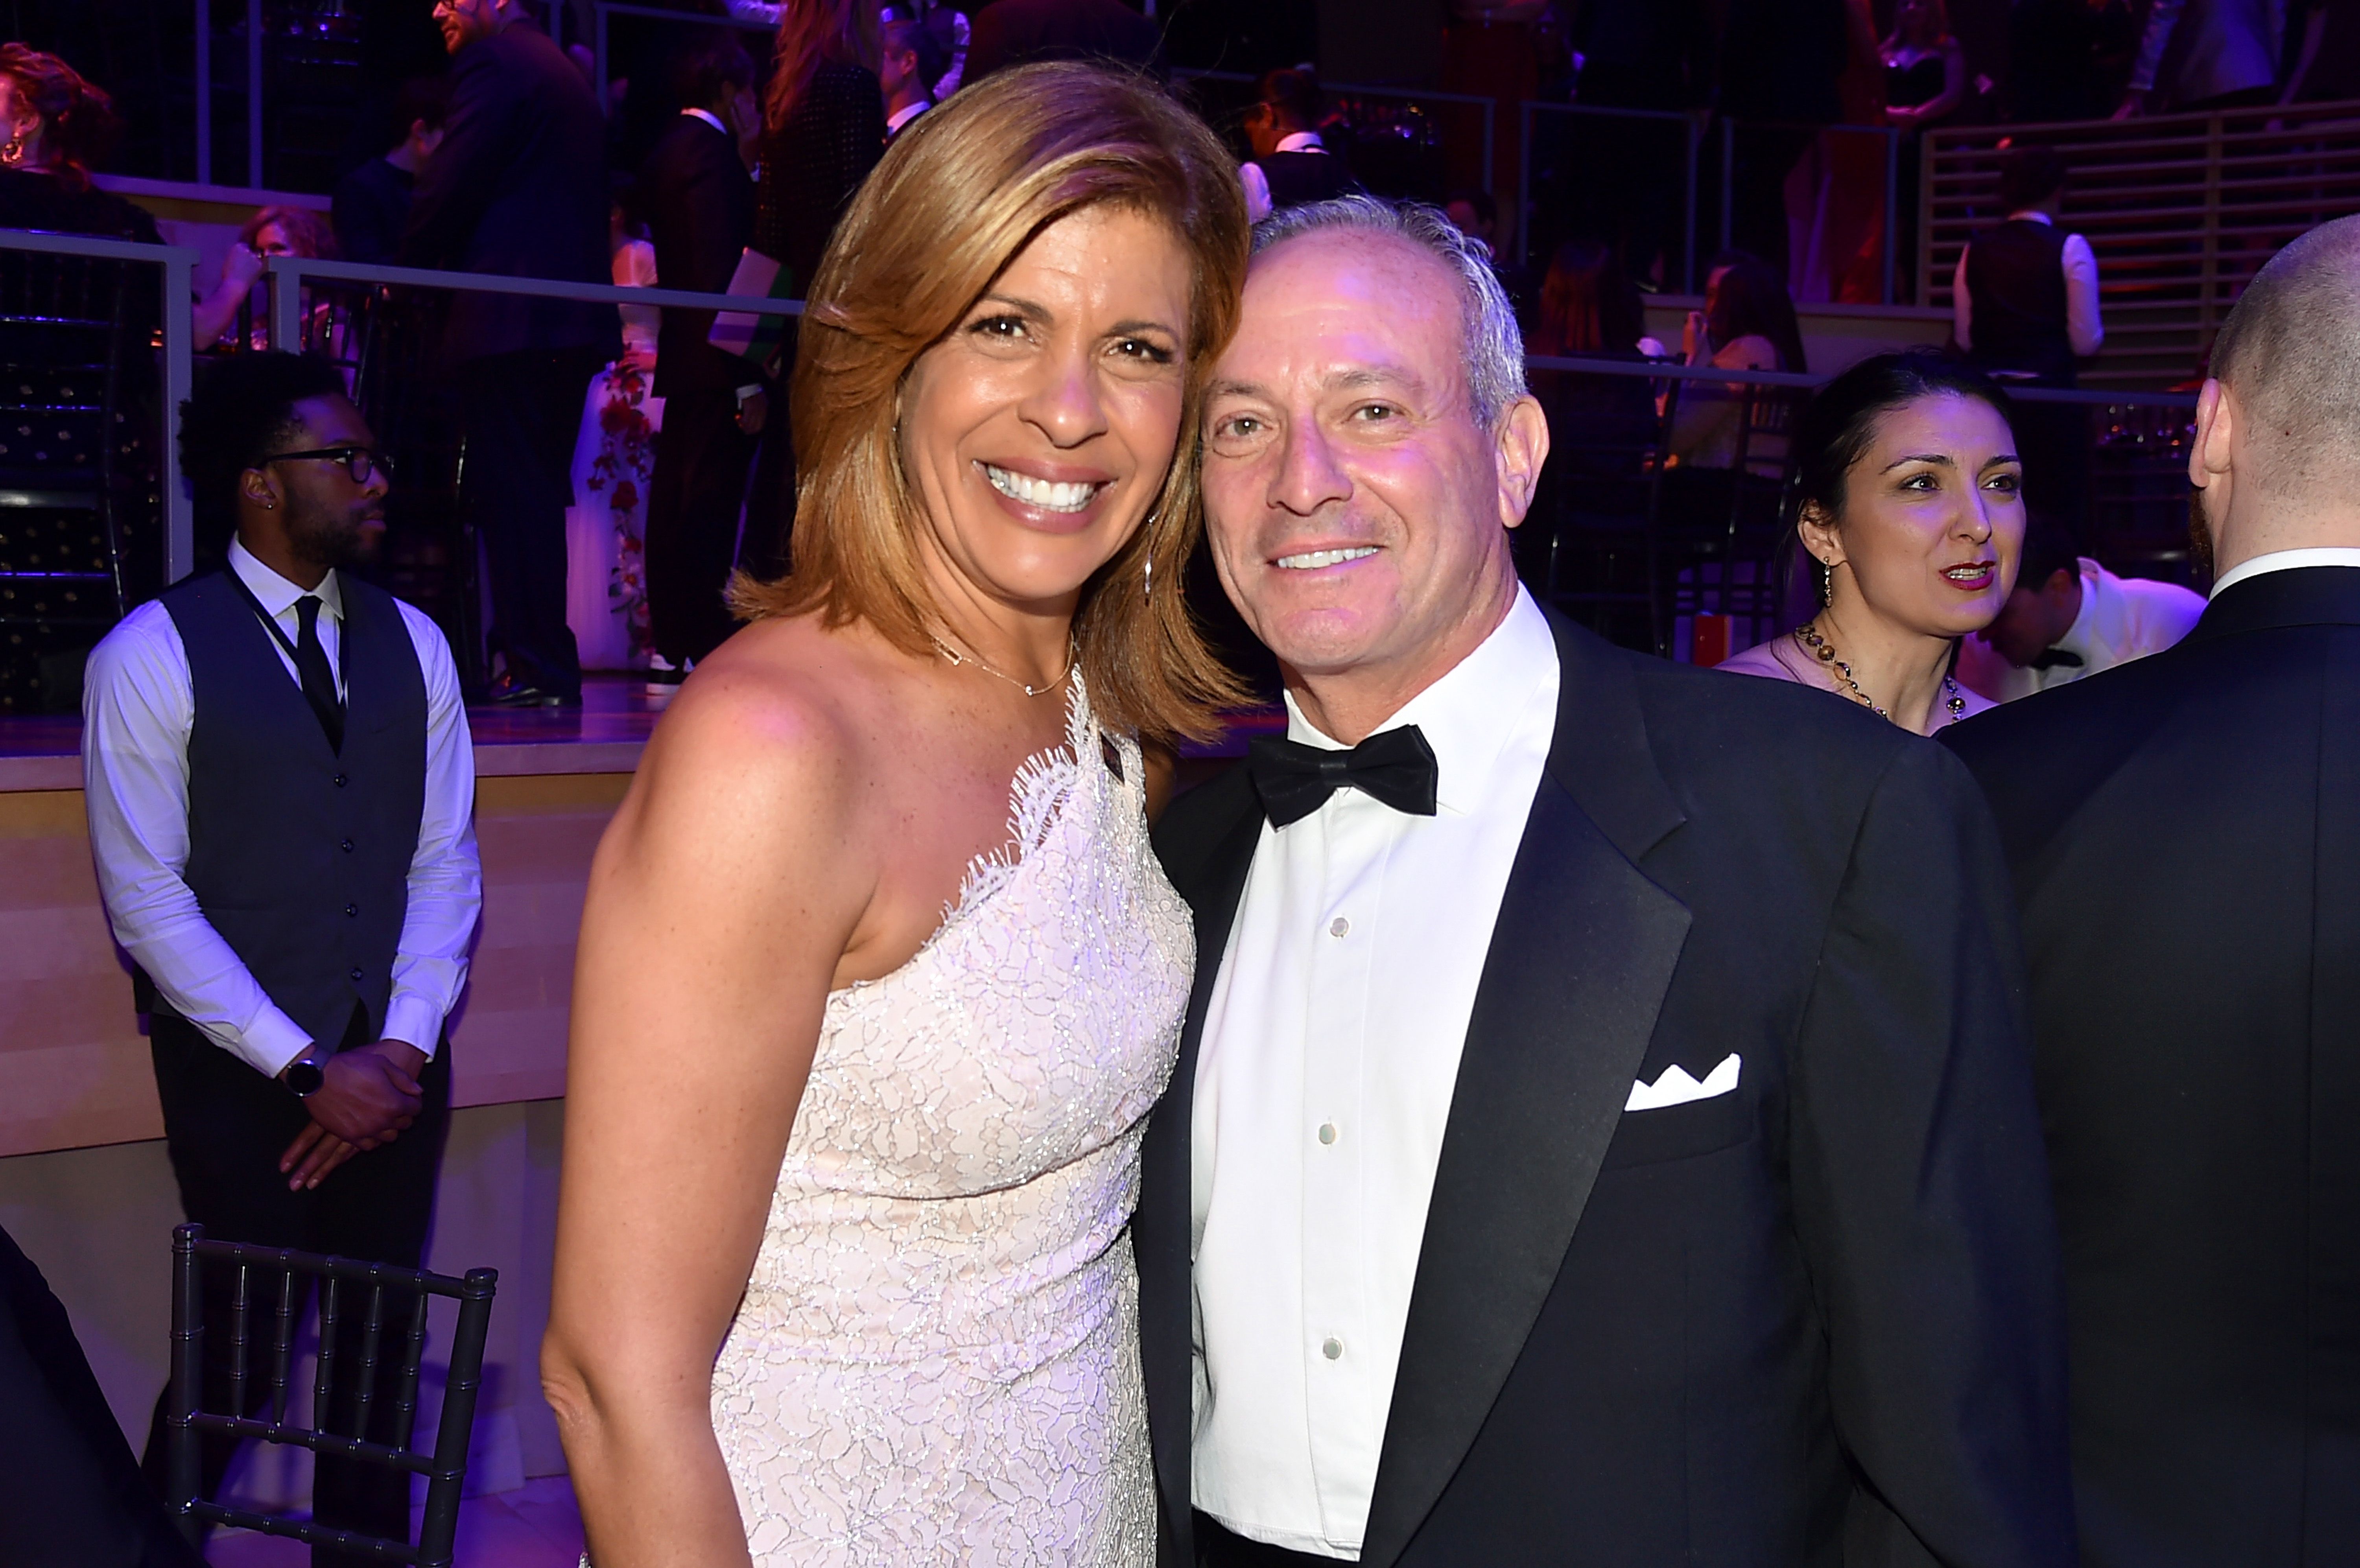 Hoda Kotb and Joel Schiffman at the TIME 100 Gala at Jazz at Lincoln Center on April 24, 2018 in New York City | Photo: Patrick McMullan/Getty Images